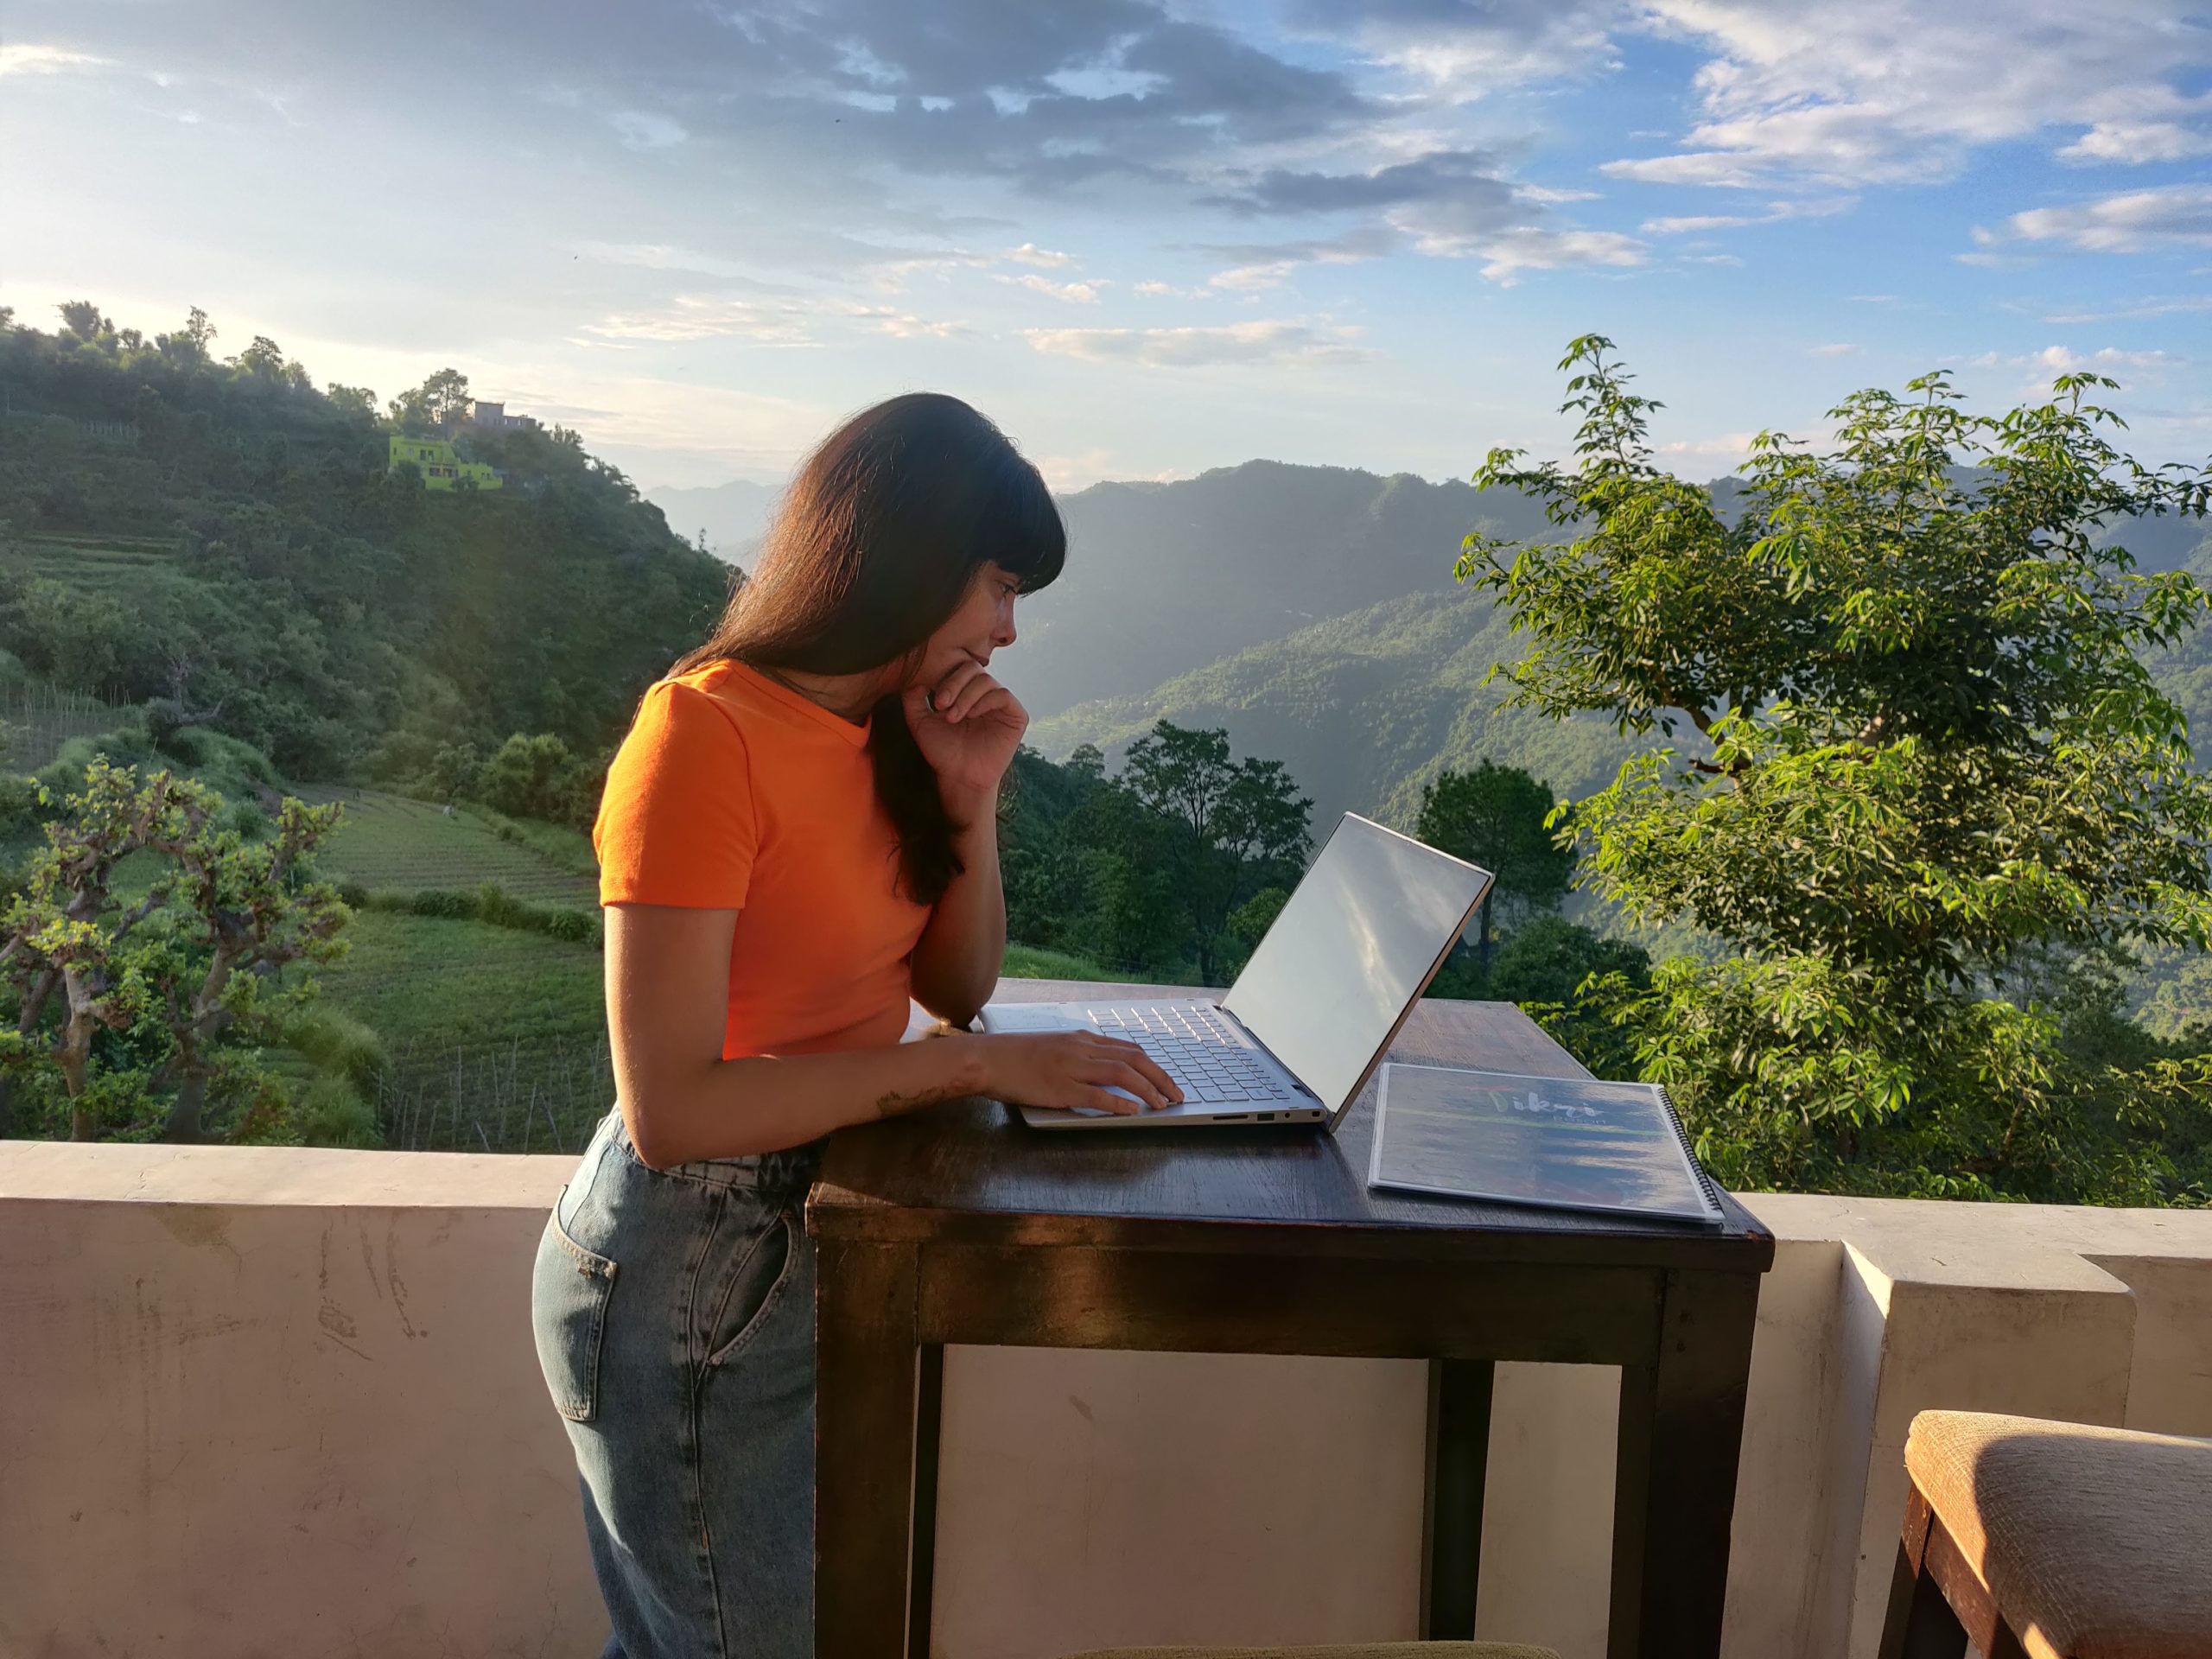 Woman working at standing desk with greenery and mountains in background